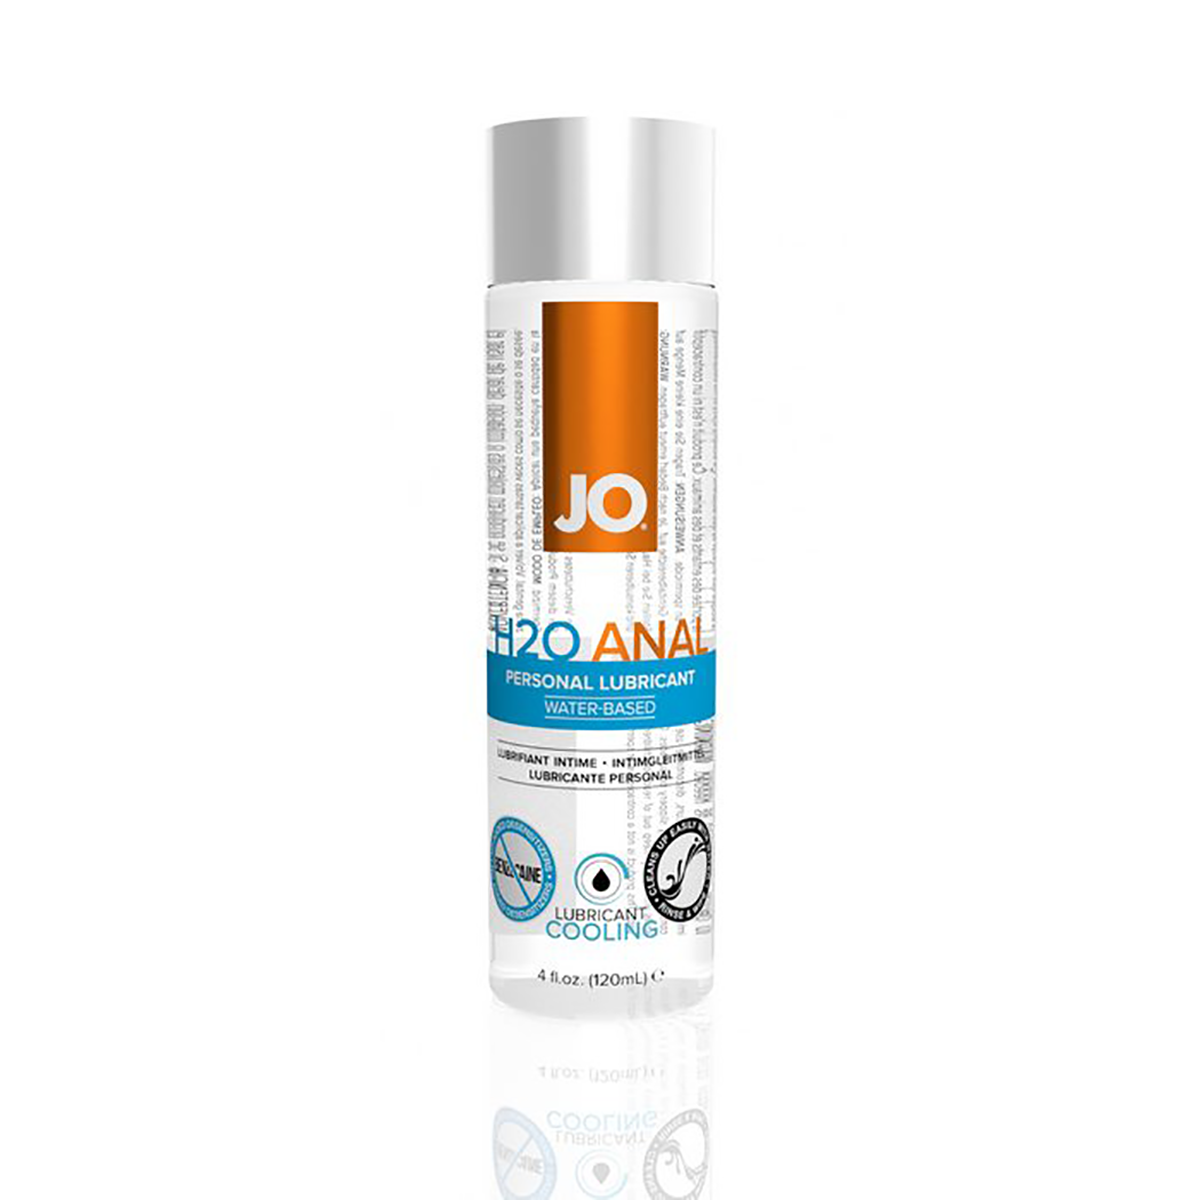 A thick, water based lube formulated specifically for anal play, it allows lots of skin and toy possibilities.